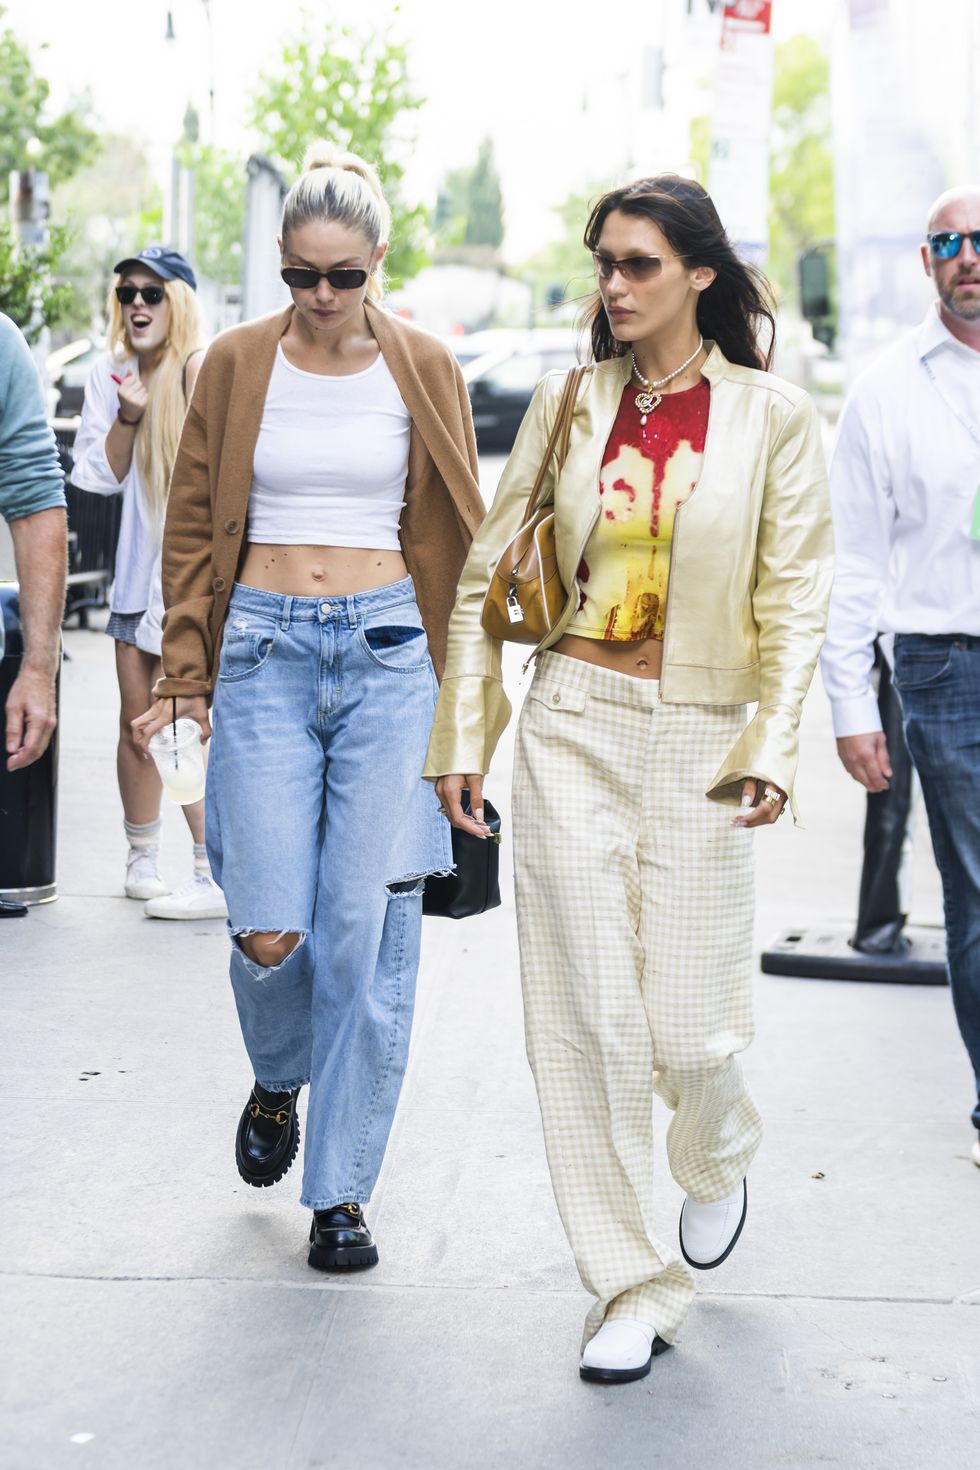 Bella Hadid's NYFW, Off-Duty Model Style Includes Lots of Prints